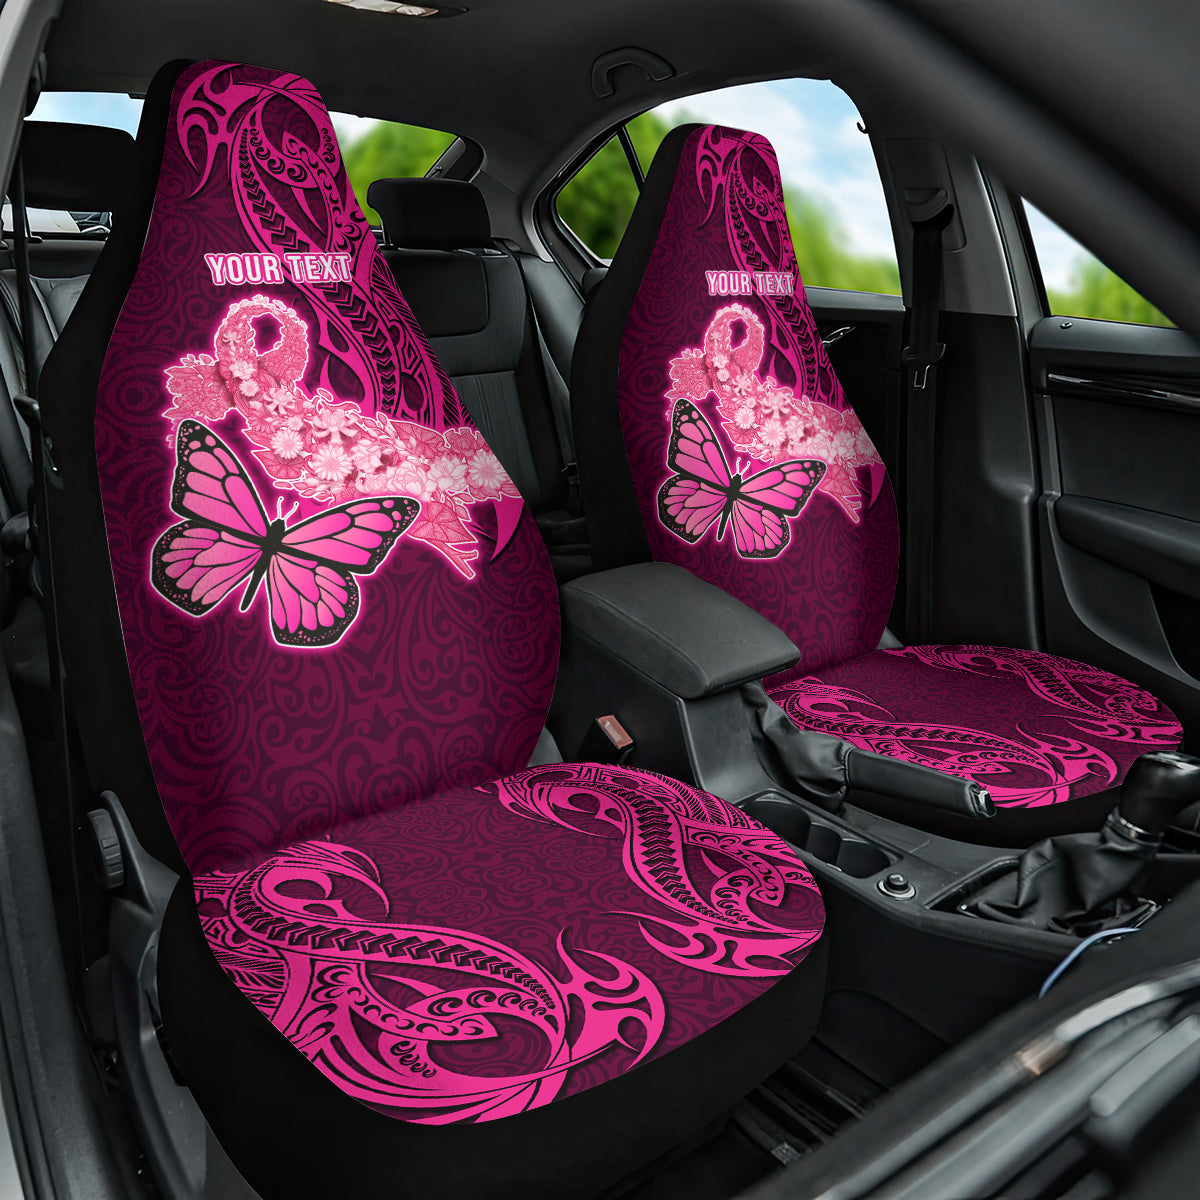 Custom Polynesia Breast Cancer Car Seat Cover Butterfly and Flowers Ribbon Maori Tattoo Ethnic Pink Style LT03 One Size Pink - Polynesian Pride